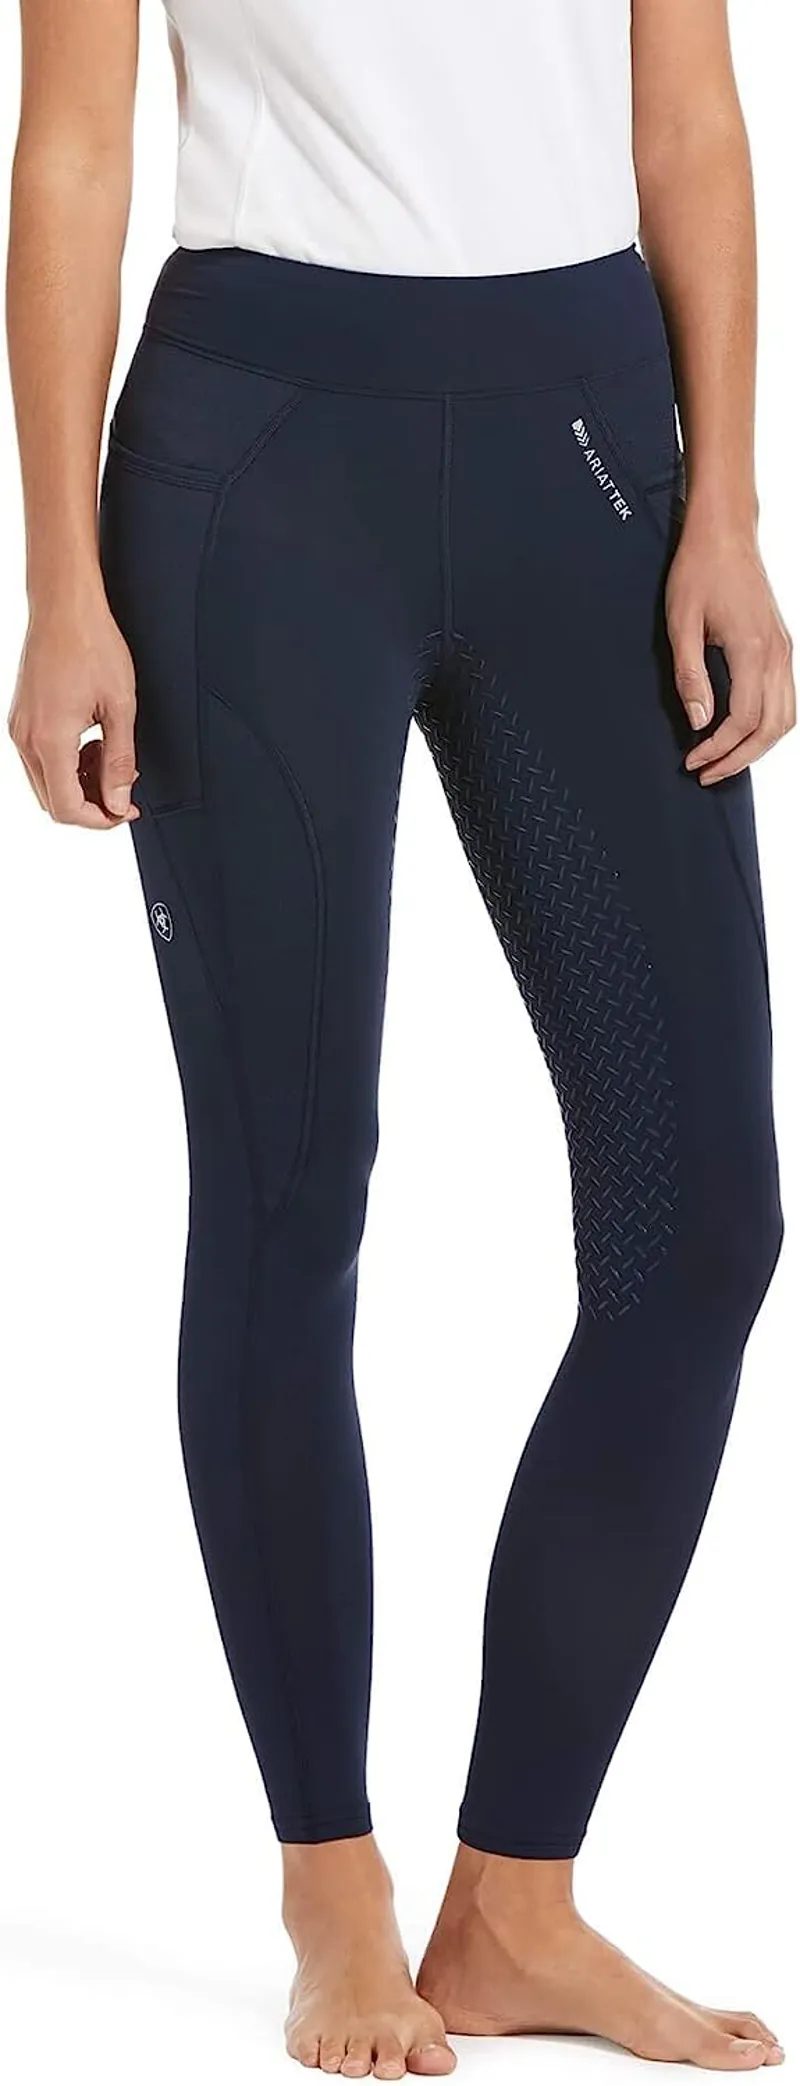 Ariat Prevail Insulated Full Seat Tights